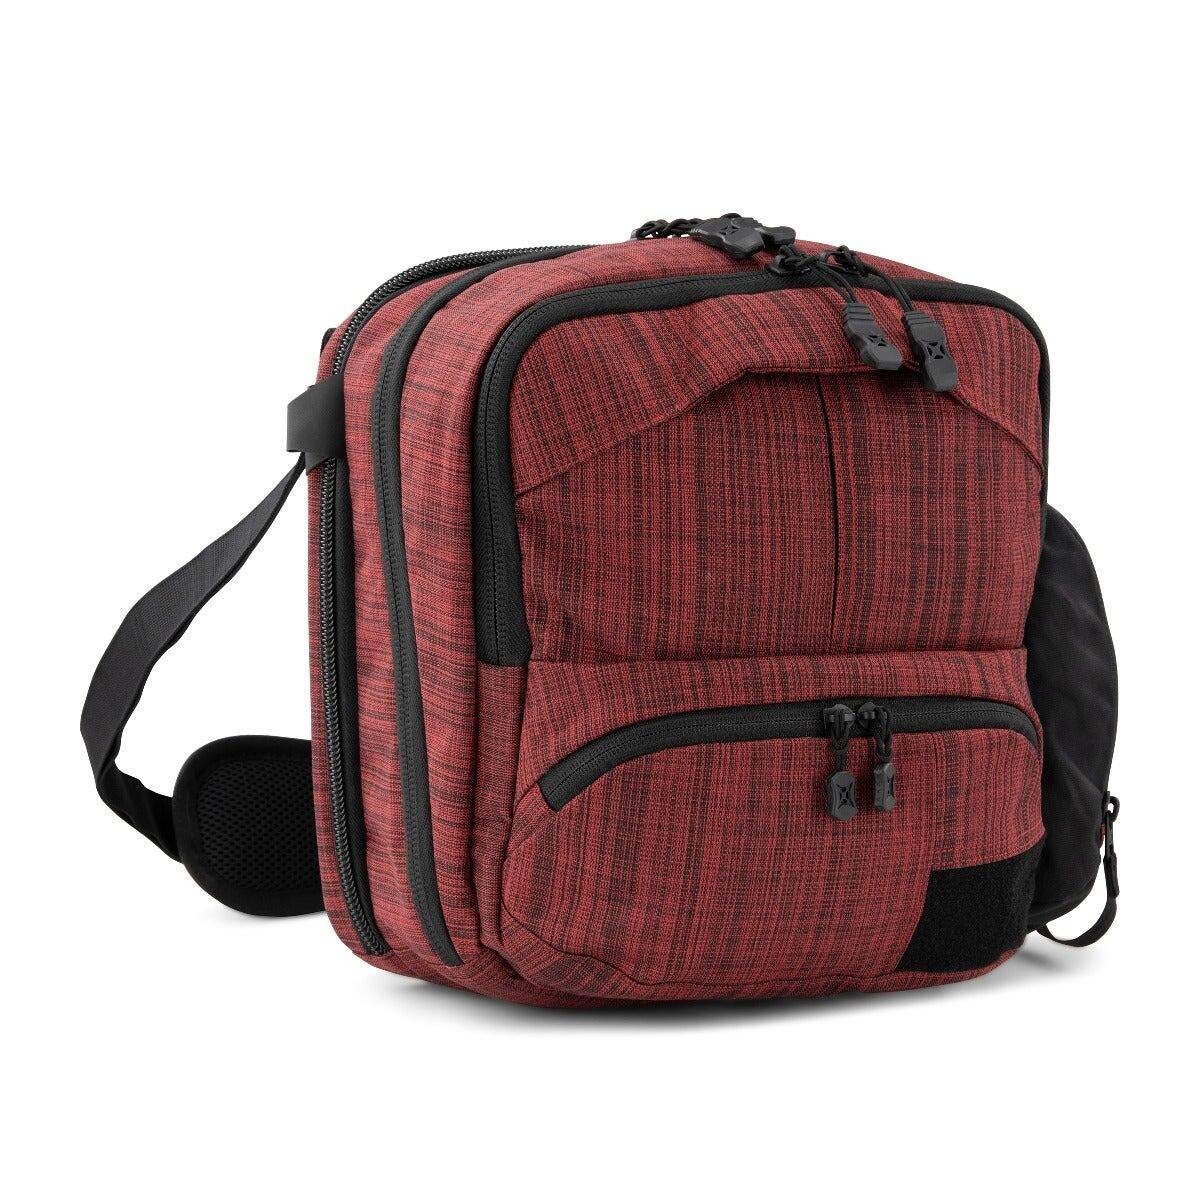 Vertx Adult Essential Bag 2.0 Tactical Bag for $40 + Free Shipping